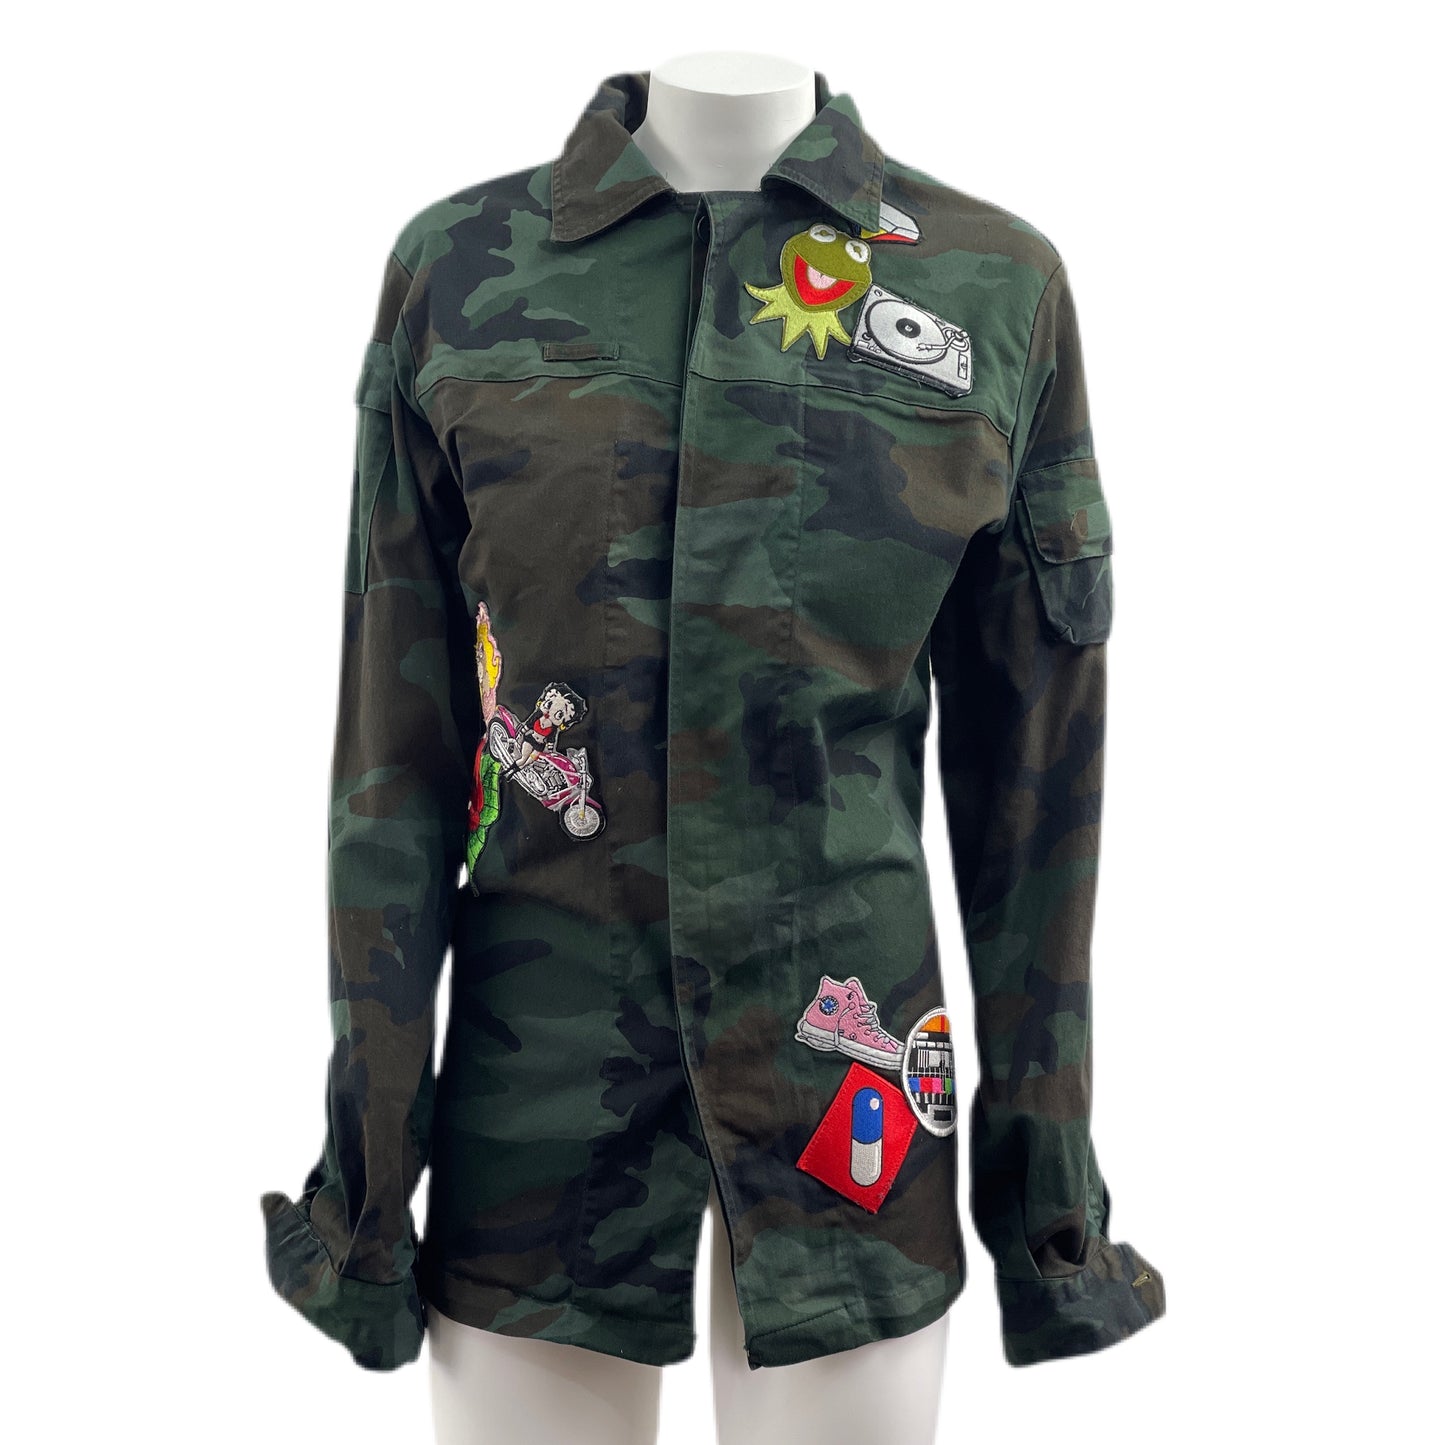 Camicia camouflage con patch cartoon TG. S